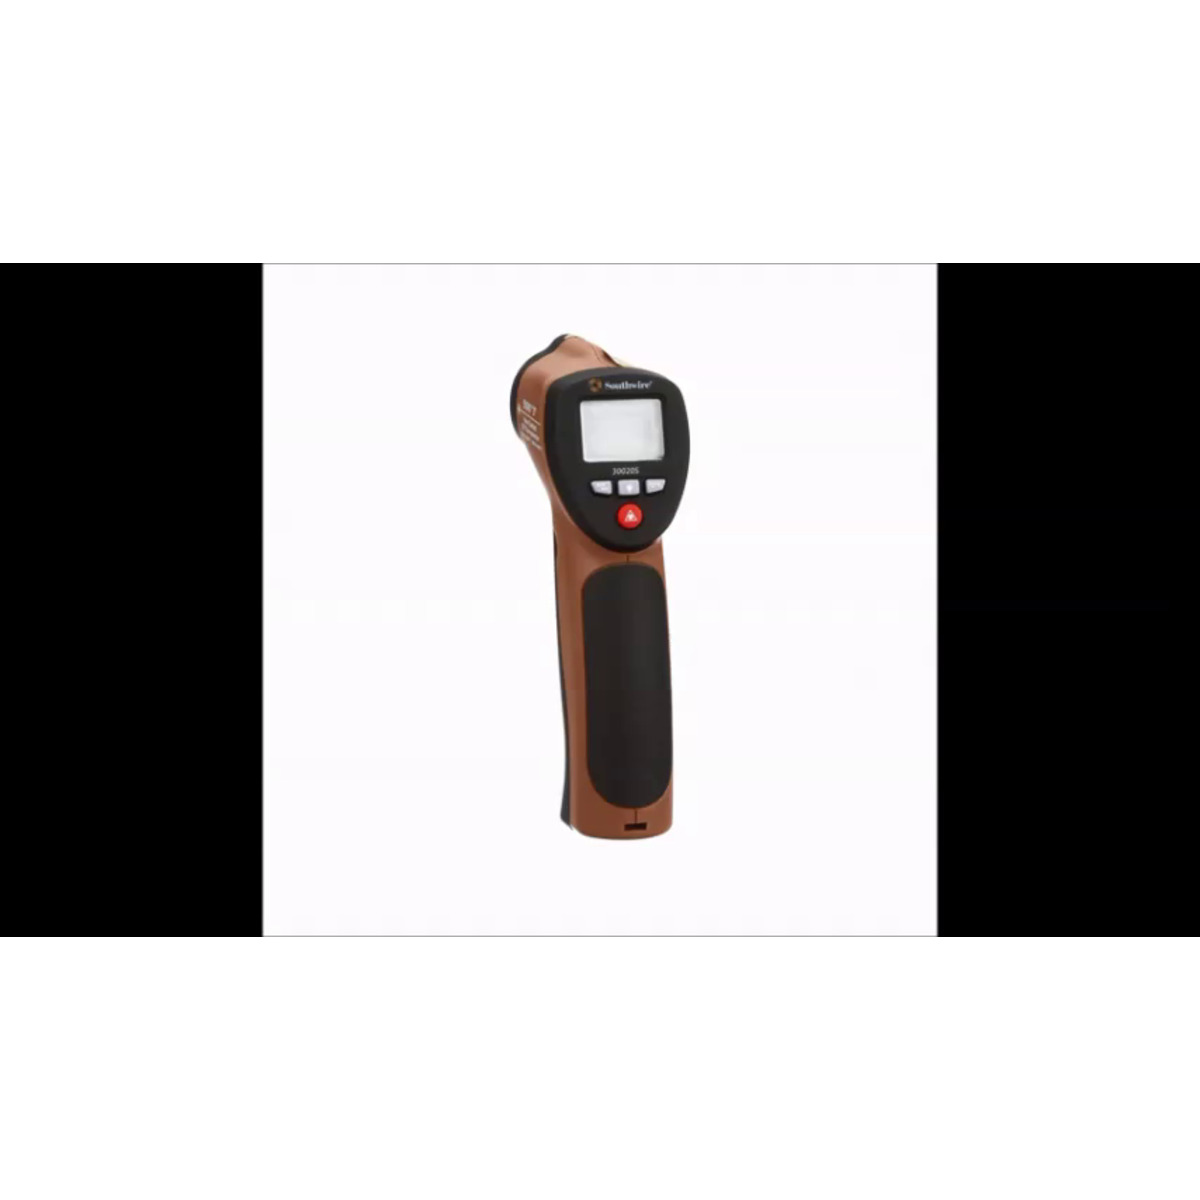 (30020S) 900?F 10-TO-1 INFRARED THERMOMETER